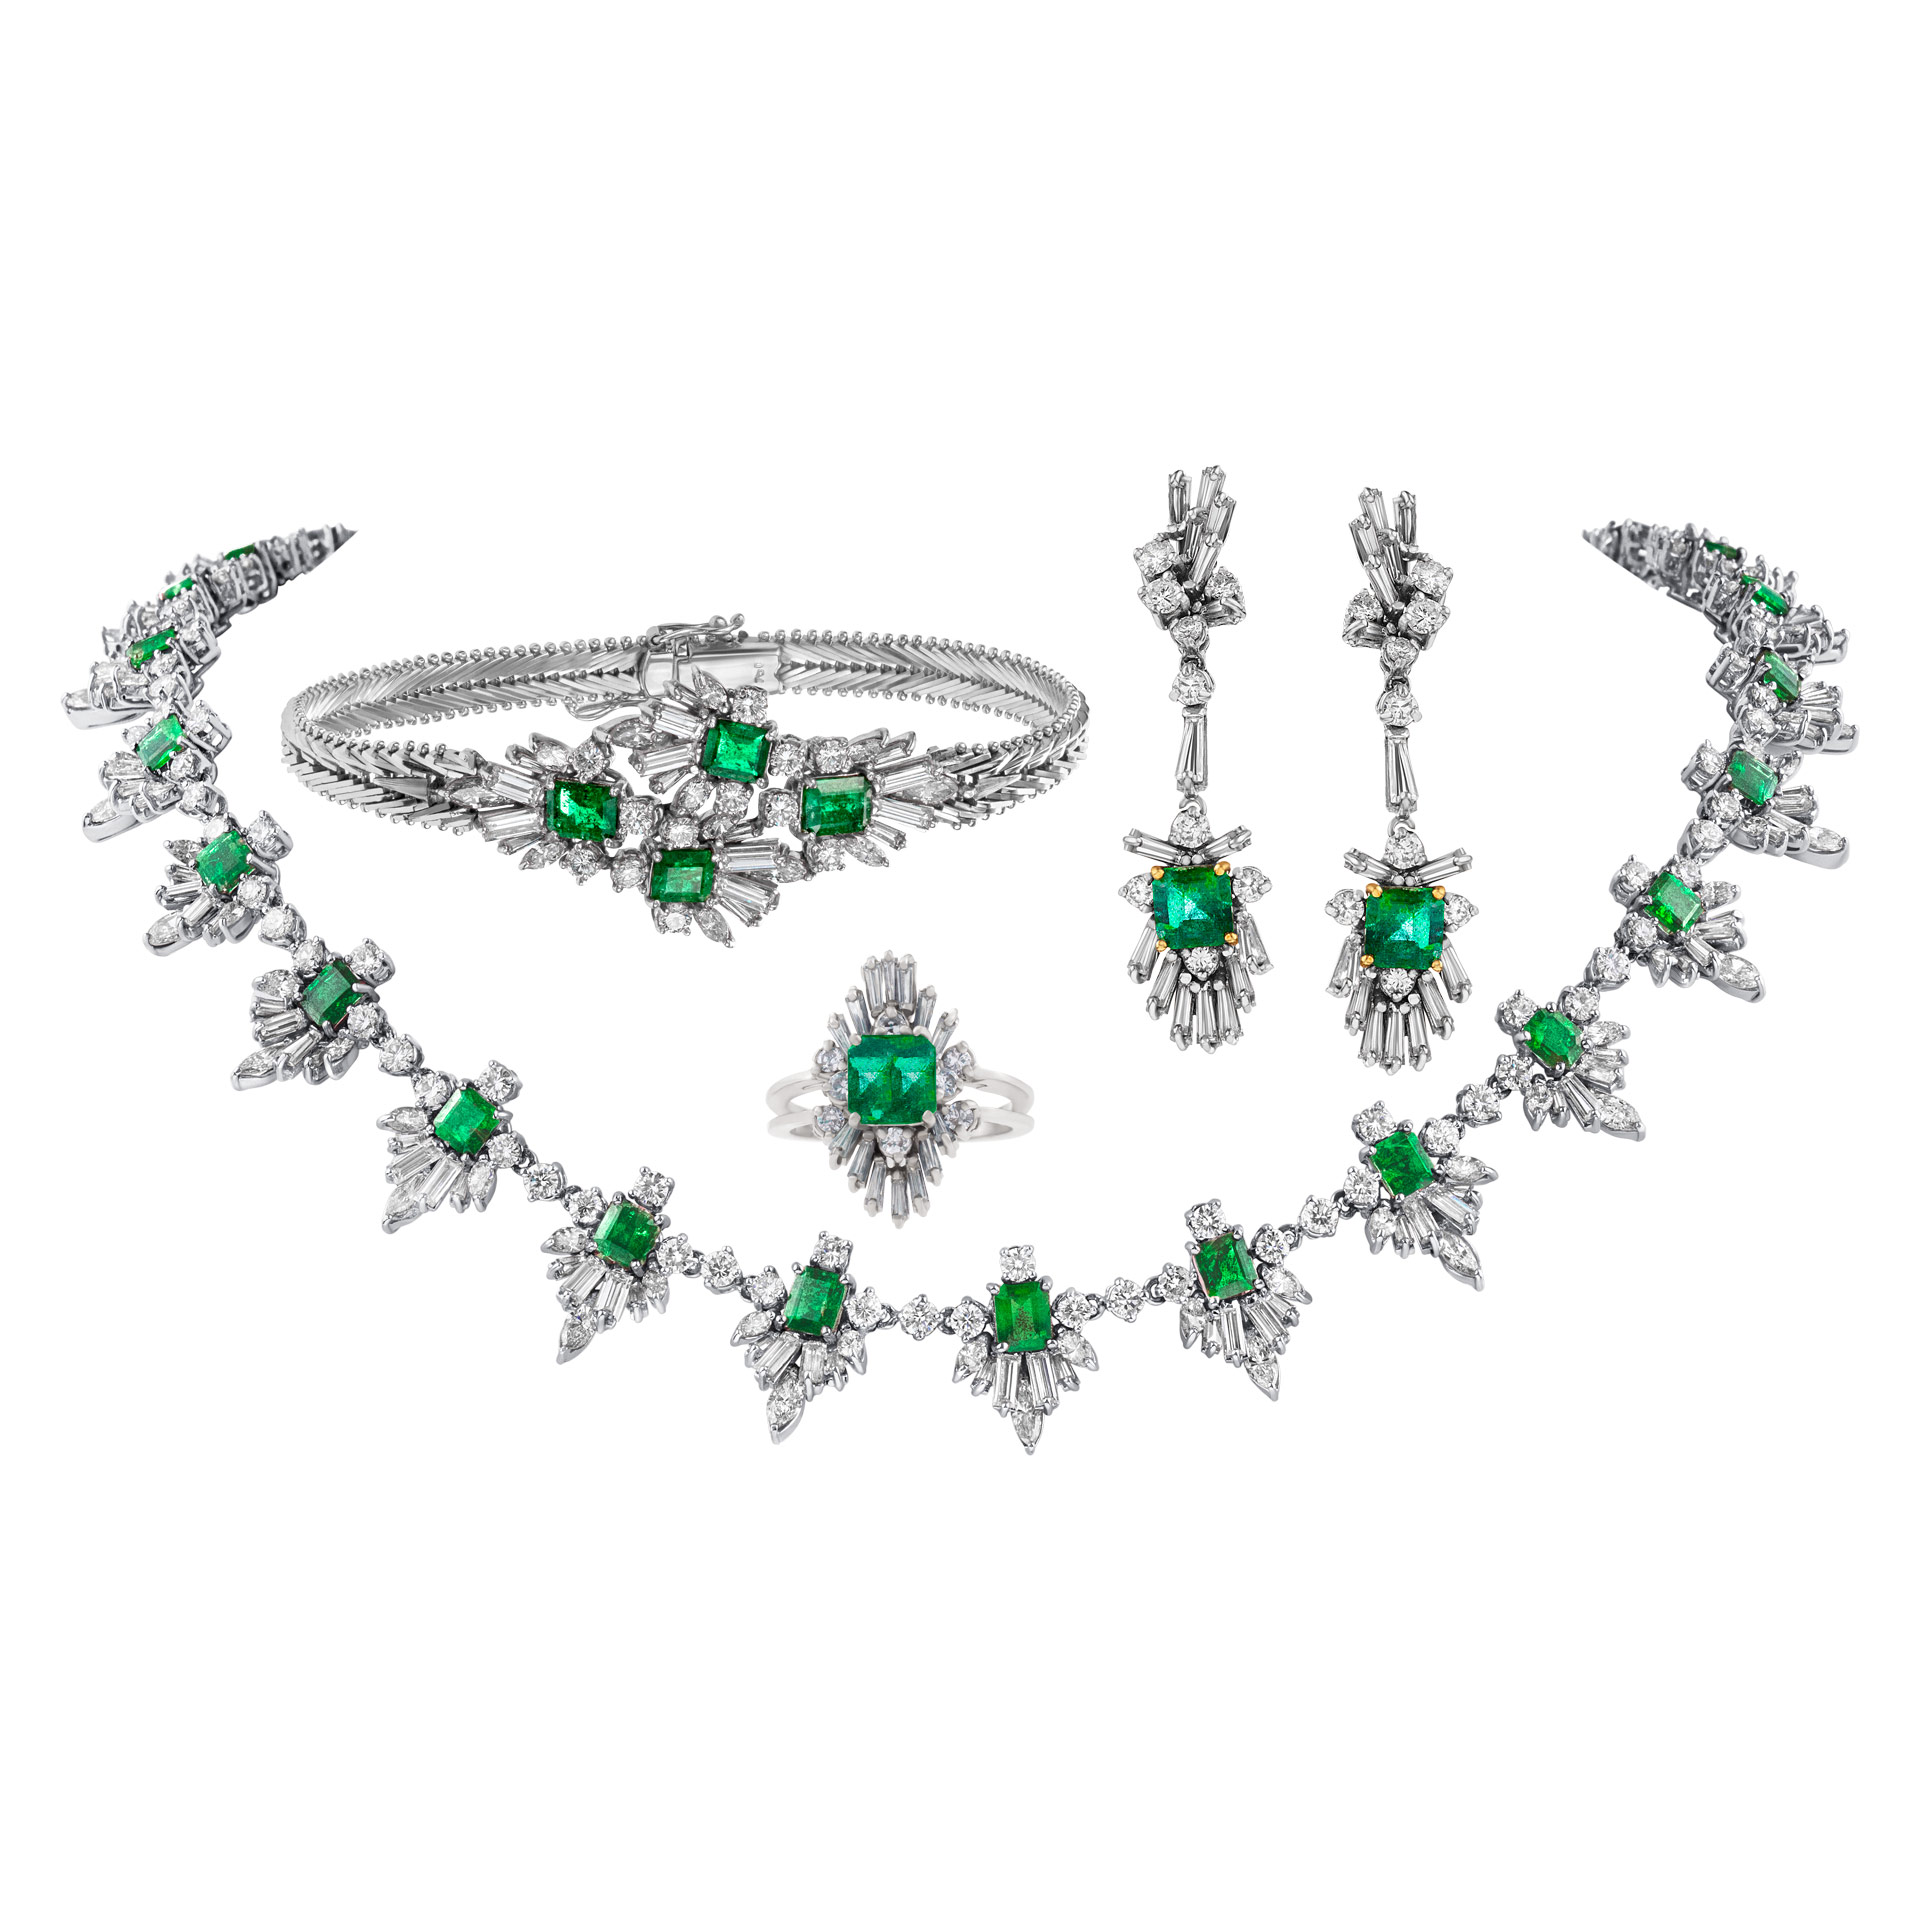 Emerald and diamond ring, earrings and necklace and bracelet in 18K white gold